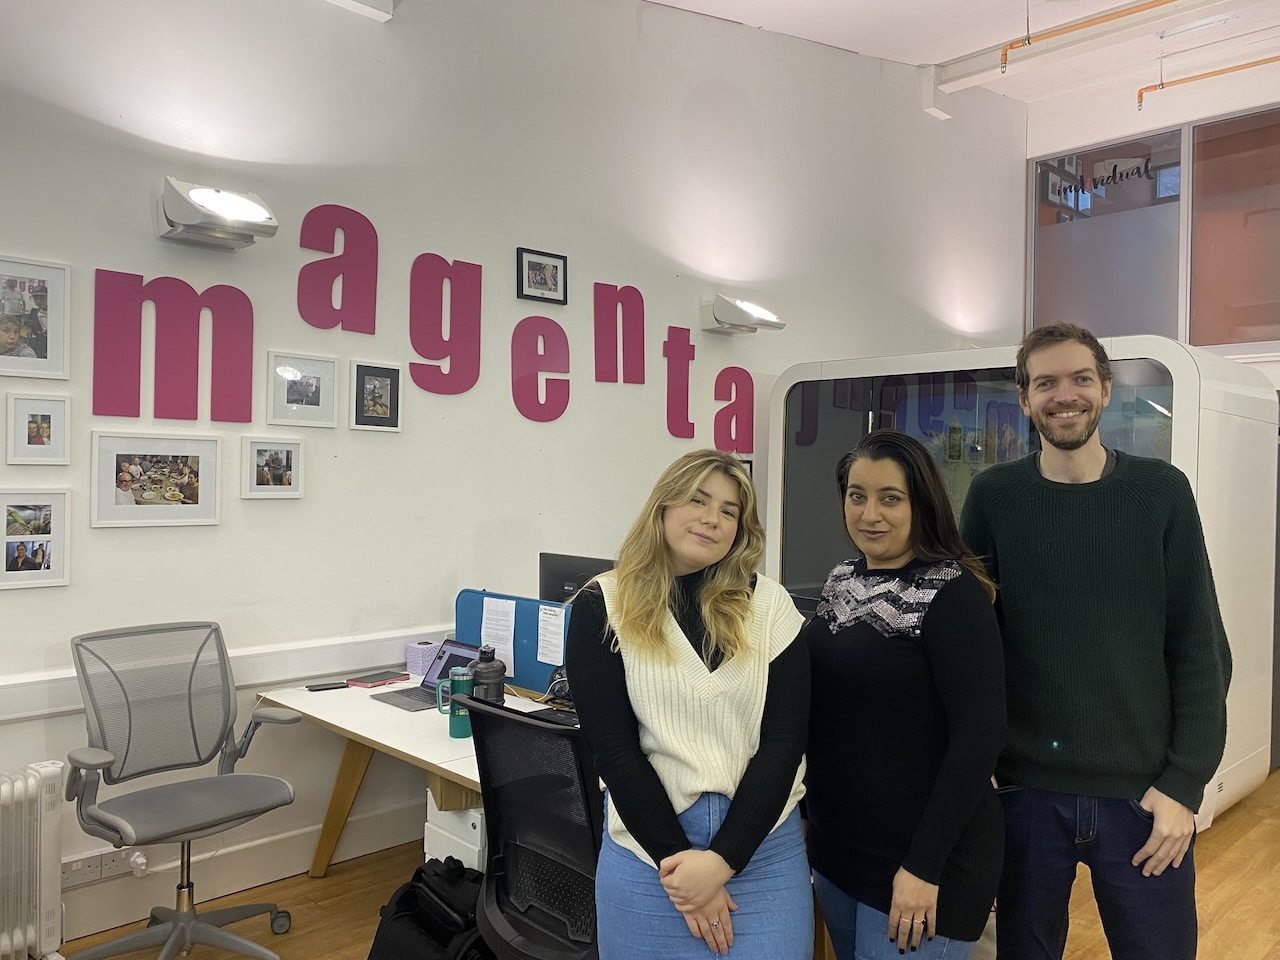 Magenta Volunteer Blog - Anna Kiff, Shahlia Nelson-Rogers and Greg Bortkiewicz stood together in the Magenta Associates office.